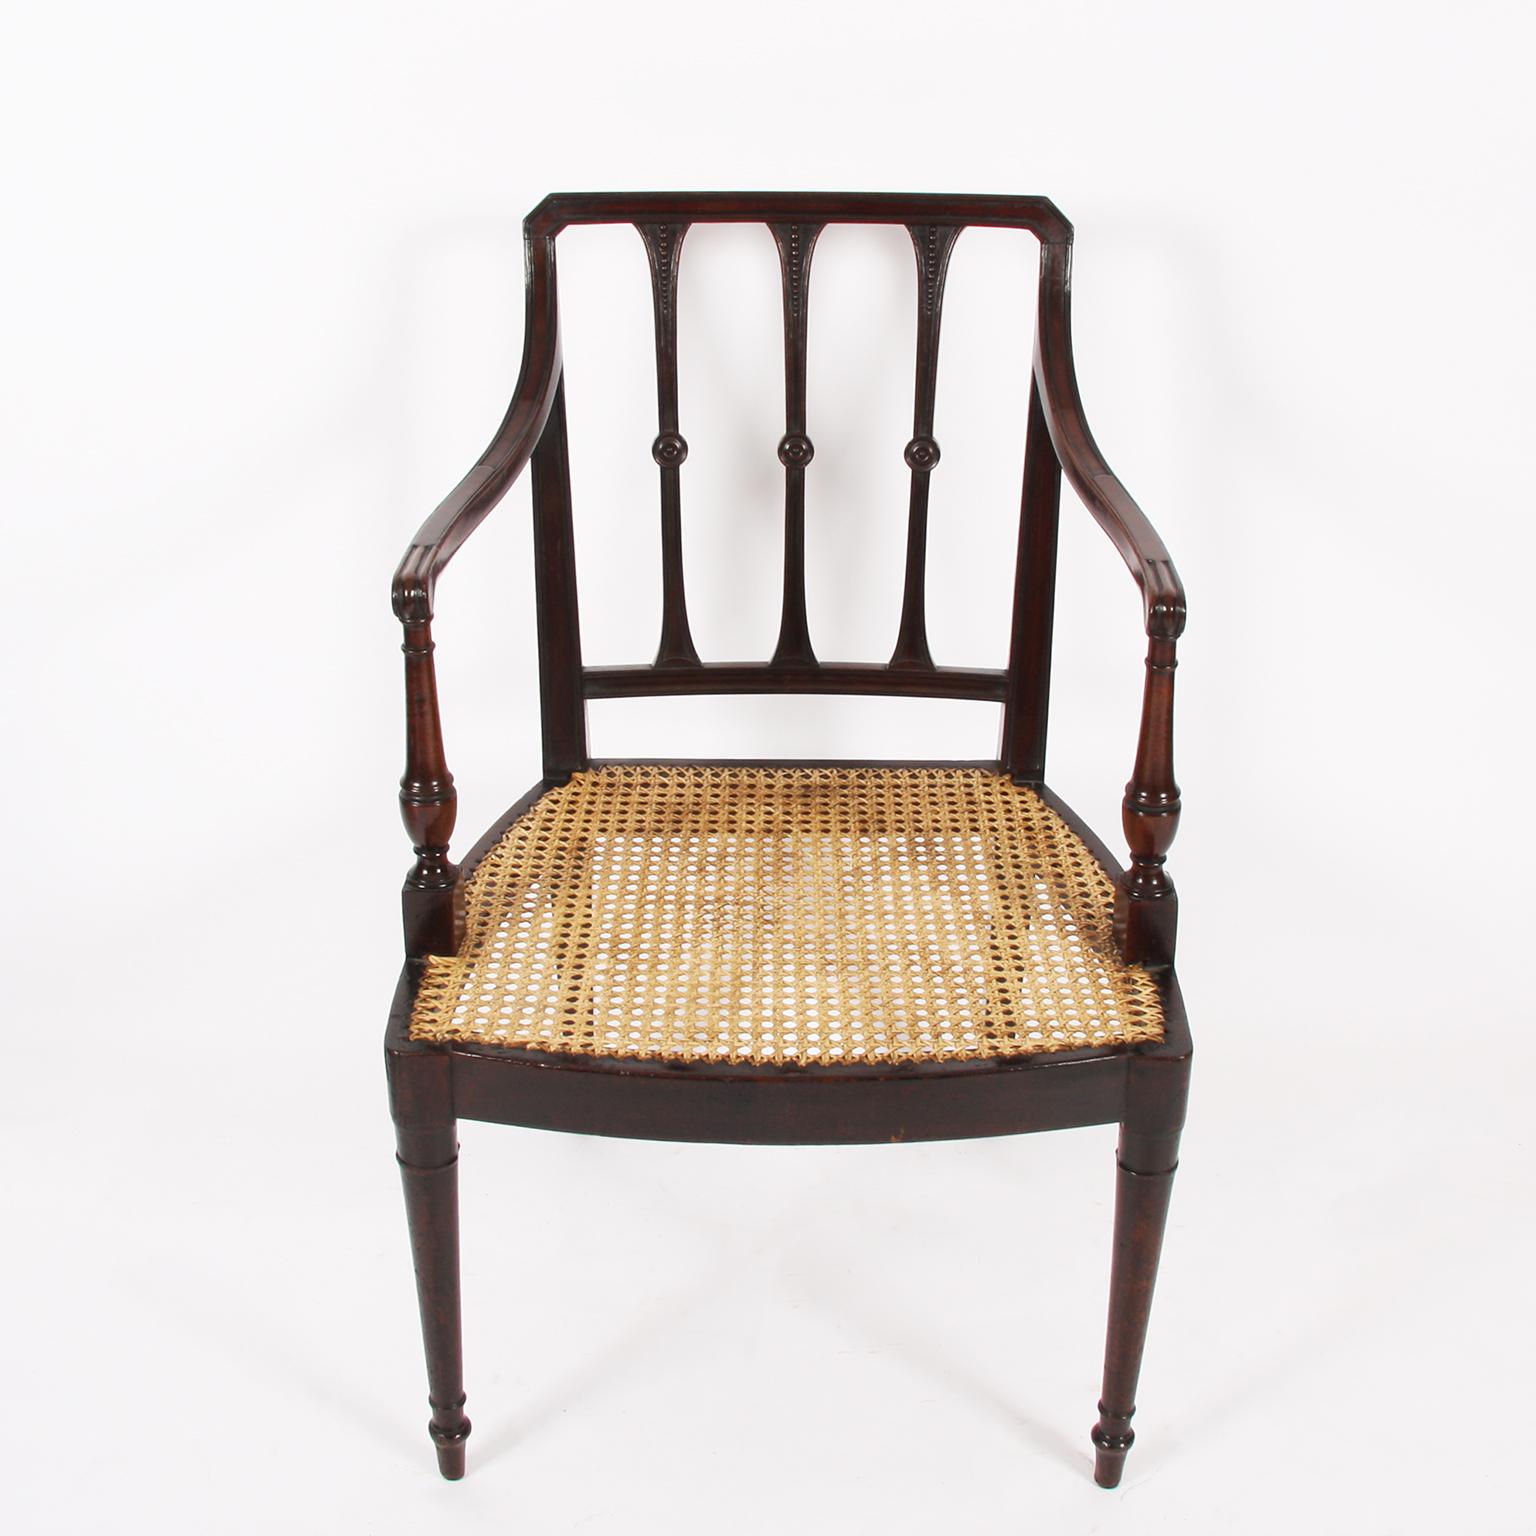 English, early 20th century.

A pair of elegant mahogany caned chairs.